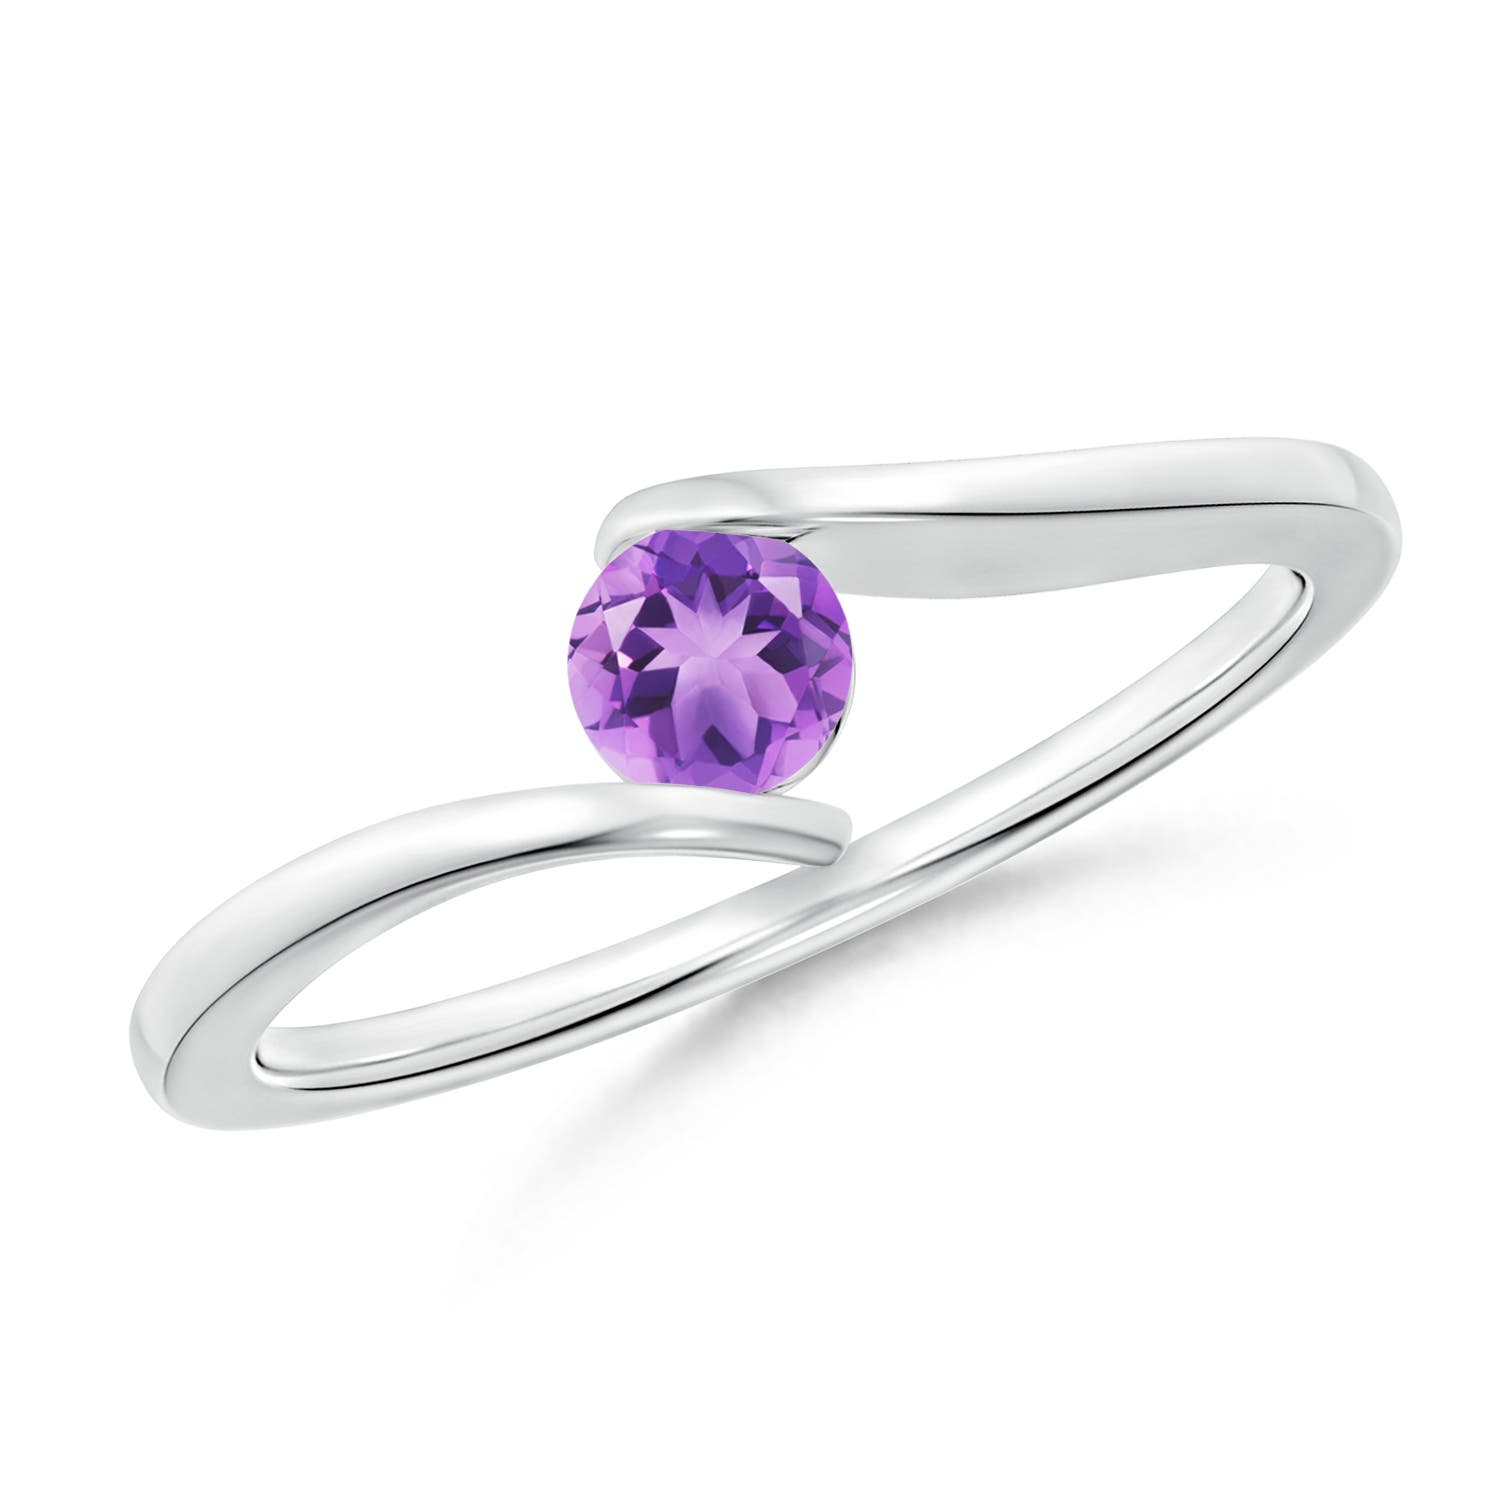 A - Amethyst / 0.25 CT / 14 KT White Gold